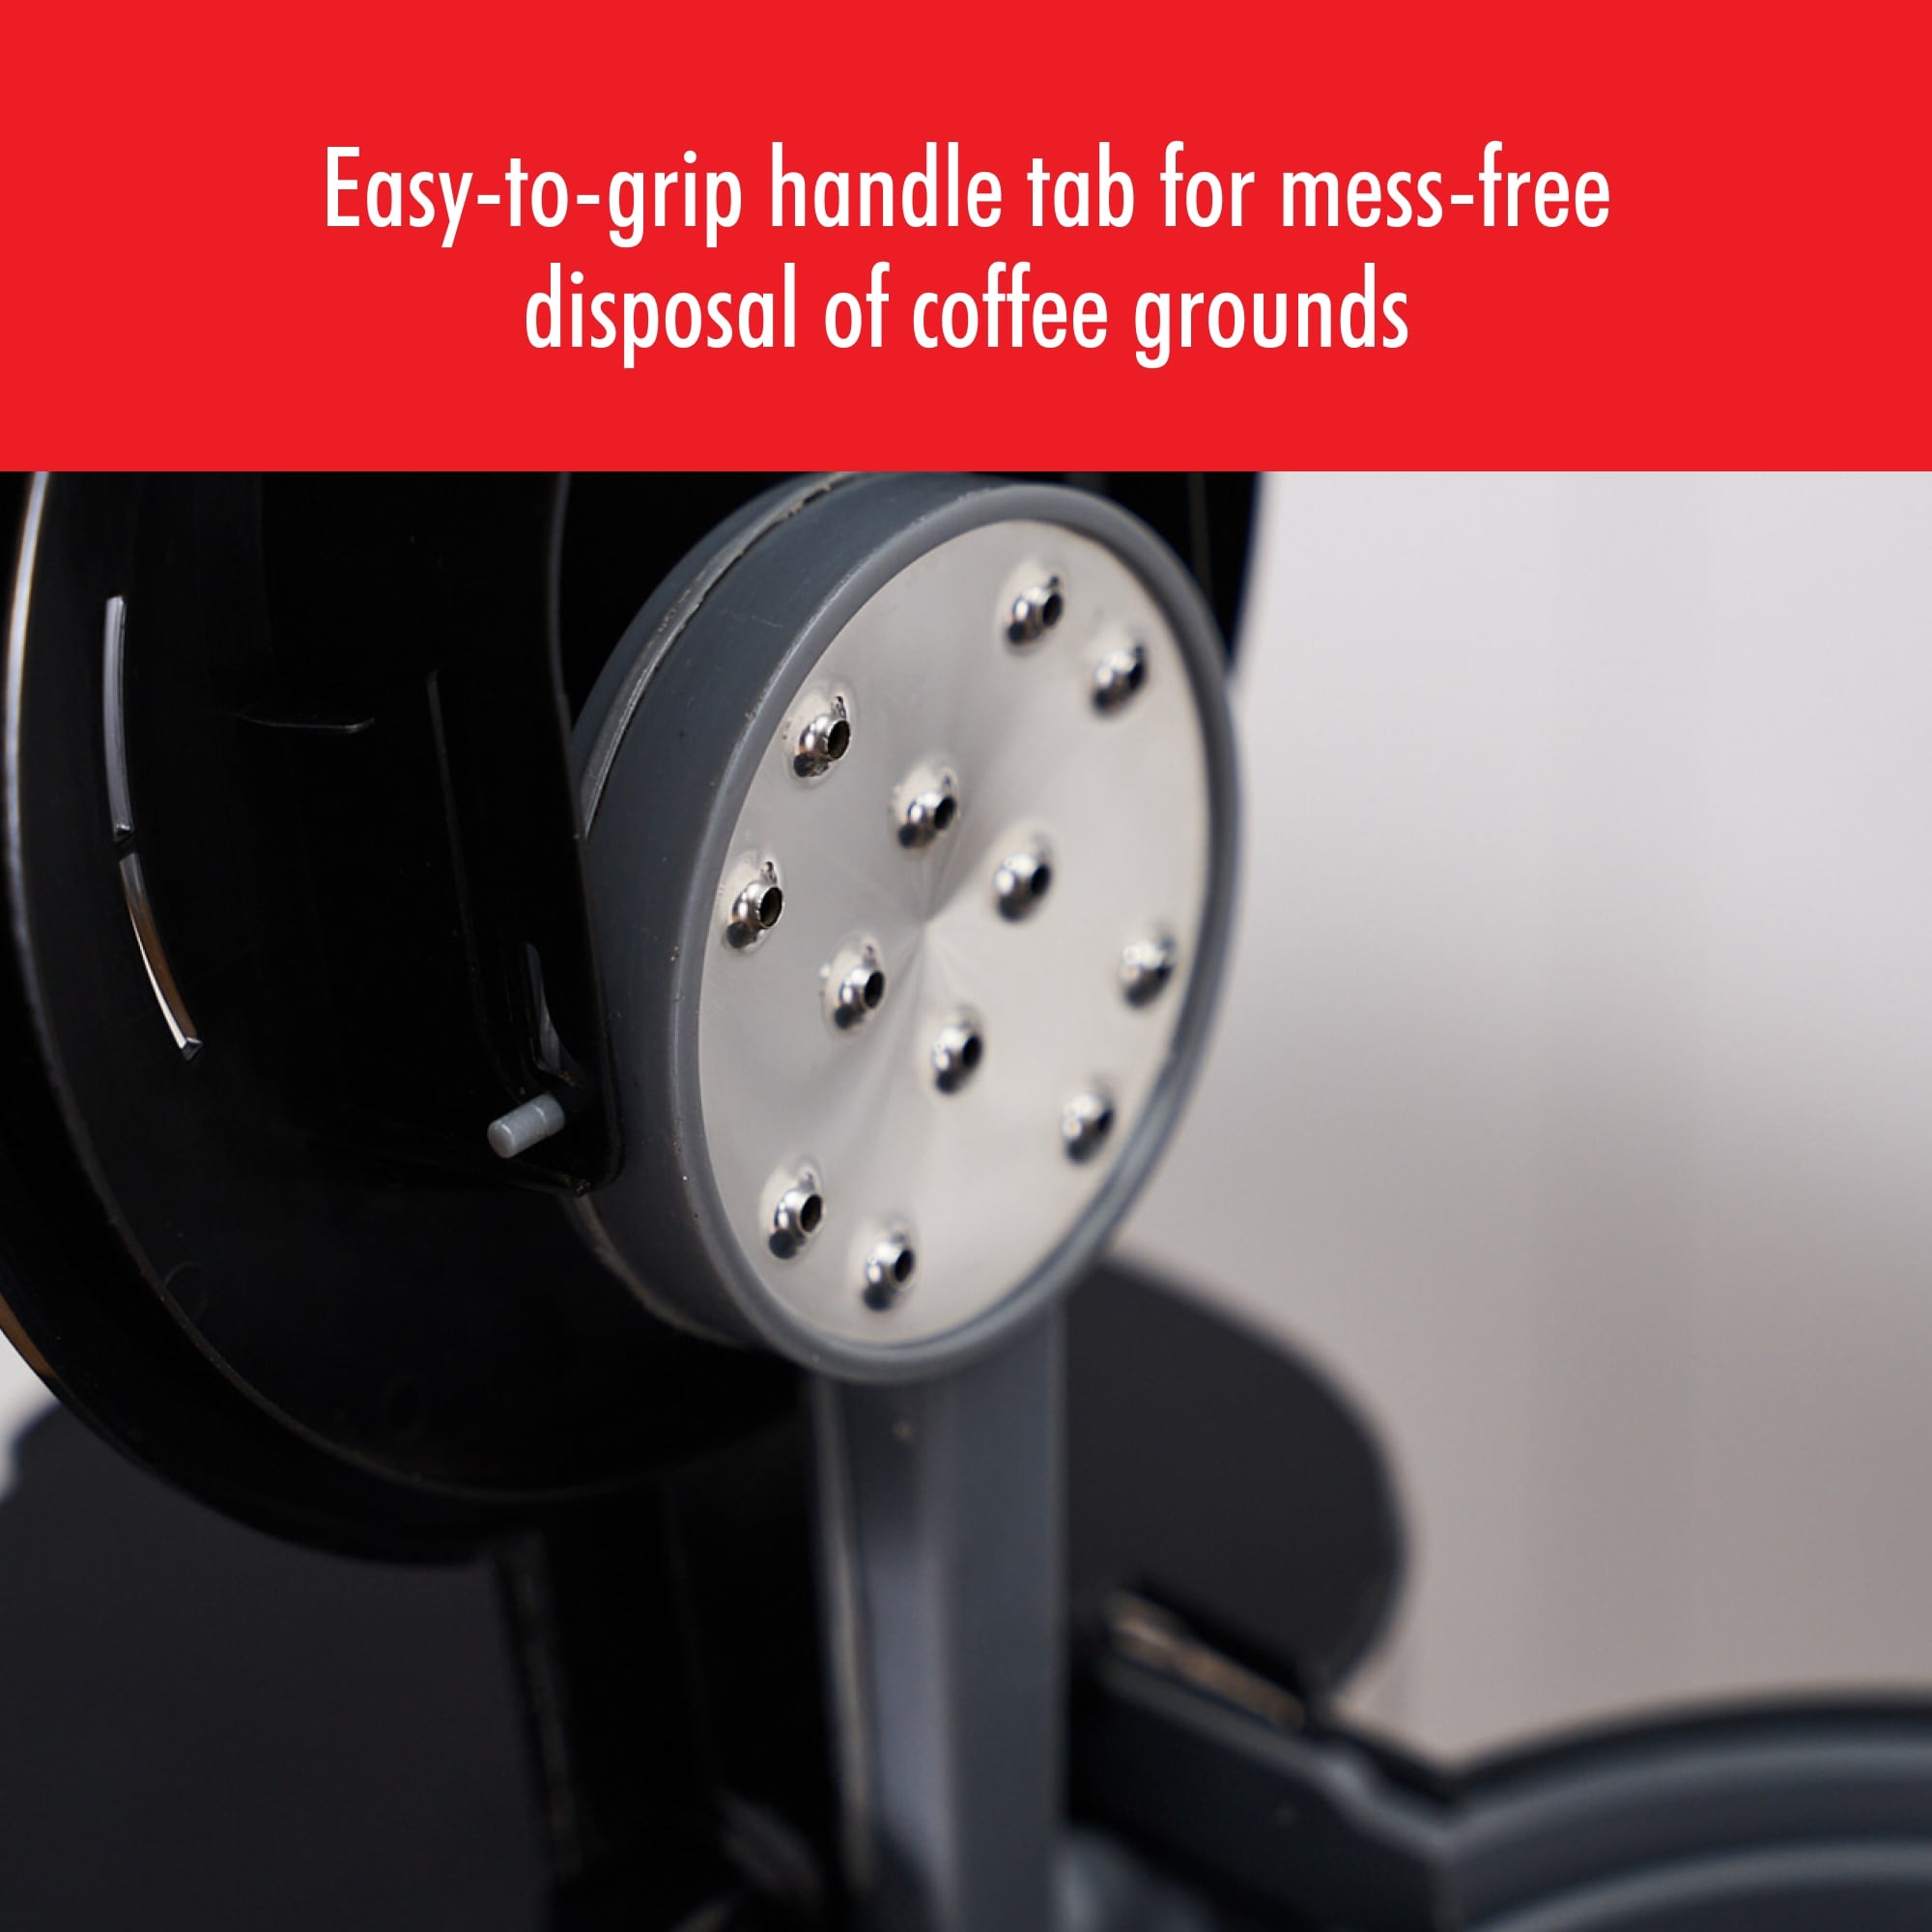 https://ak1.ostkcdn.com/images/products/is/images/direct/d141b22289ecda998f3d5b41a33d0666c51ab50f/ZWILLING-Enfinigy-Drip-Coffee-Maker-with-Thermo-Carafe-10-Cup%2C-Awarded-the-SCA-Golden-Cup-Standard.jpg